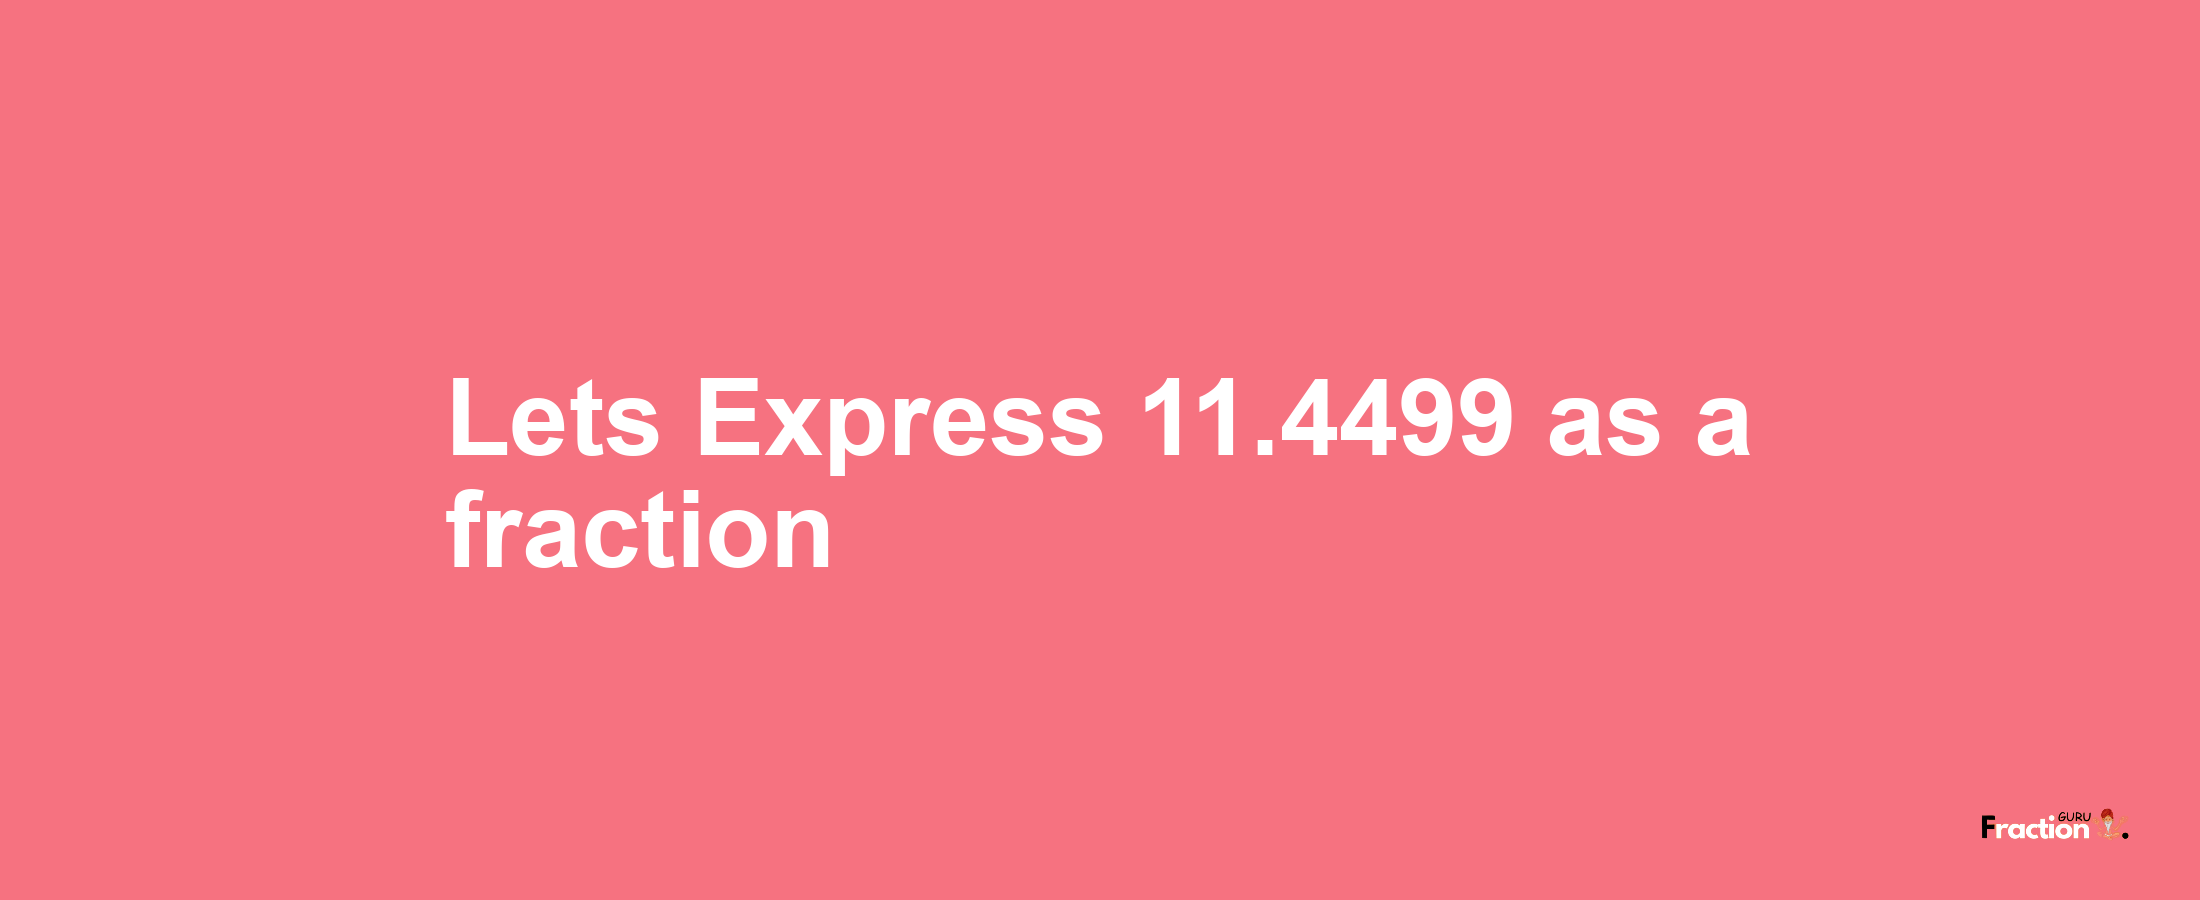 Lets Express 11.4499 as afraction